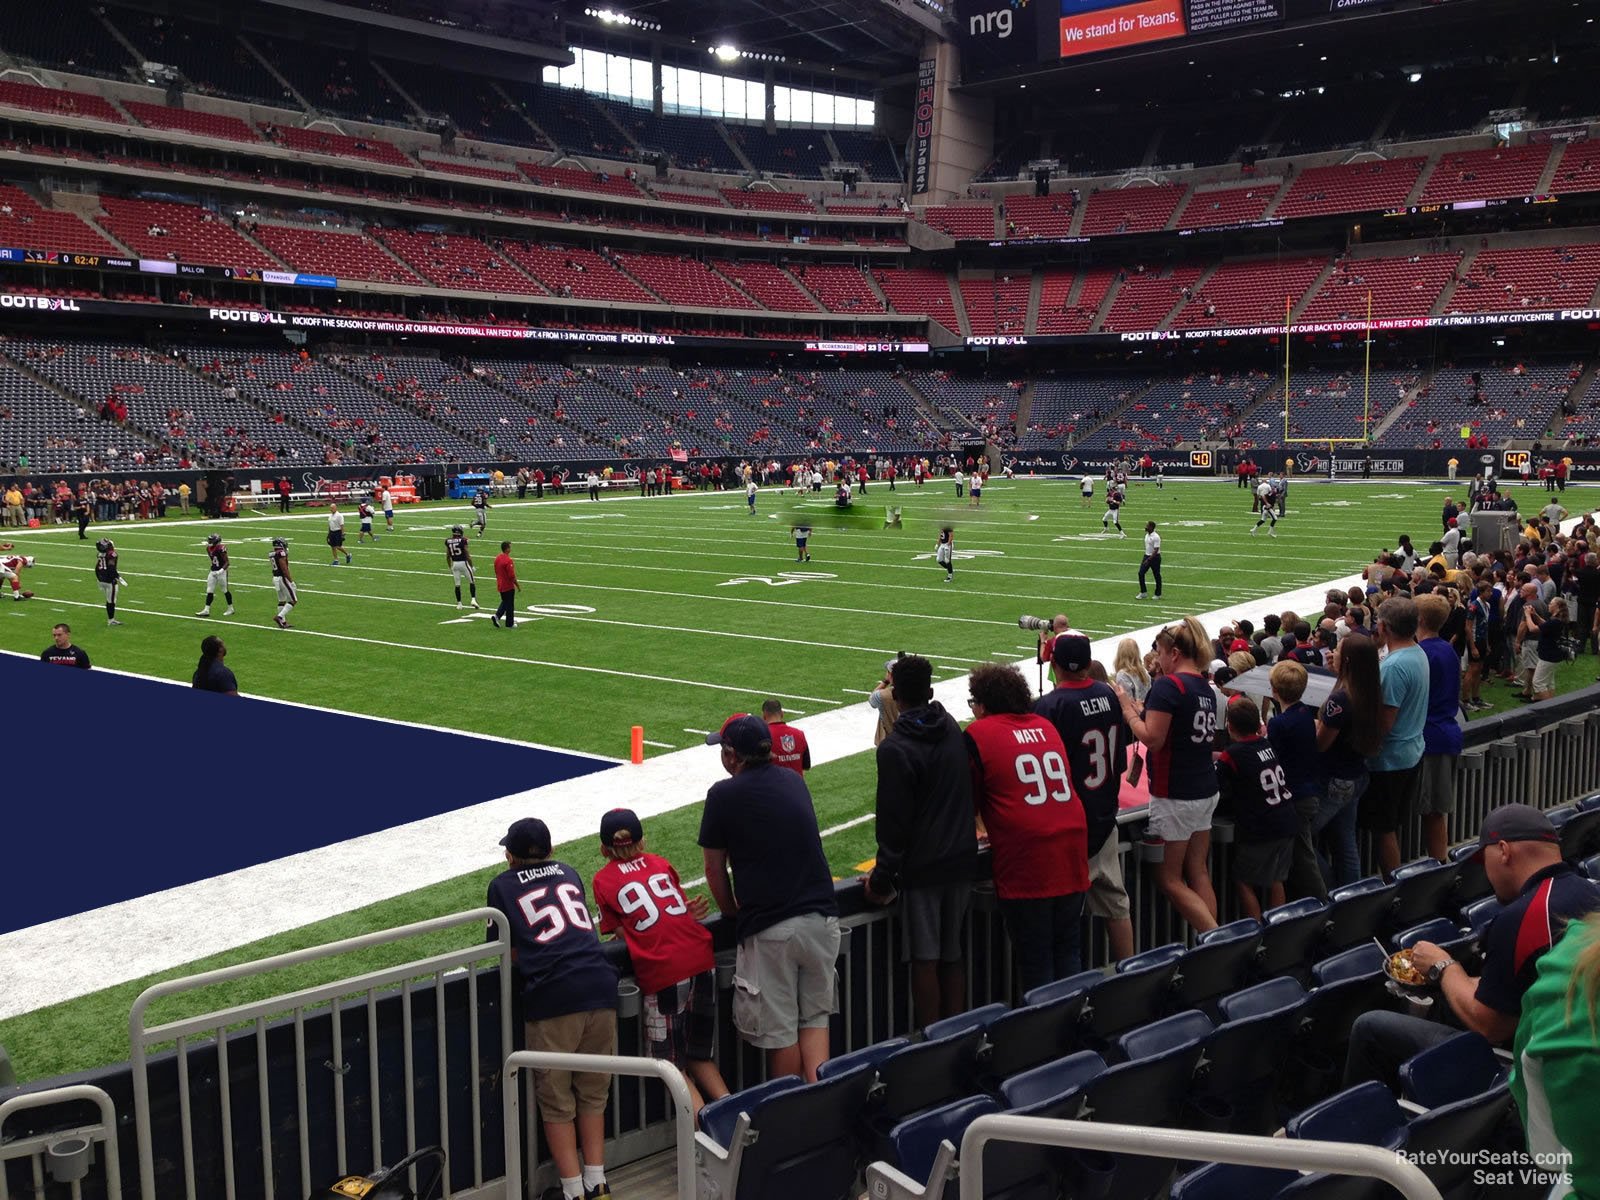 section 112, row c seat view  for football - nrg stadium